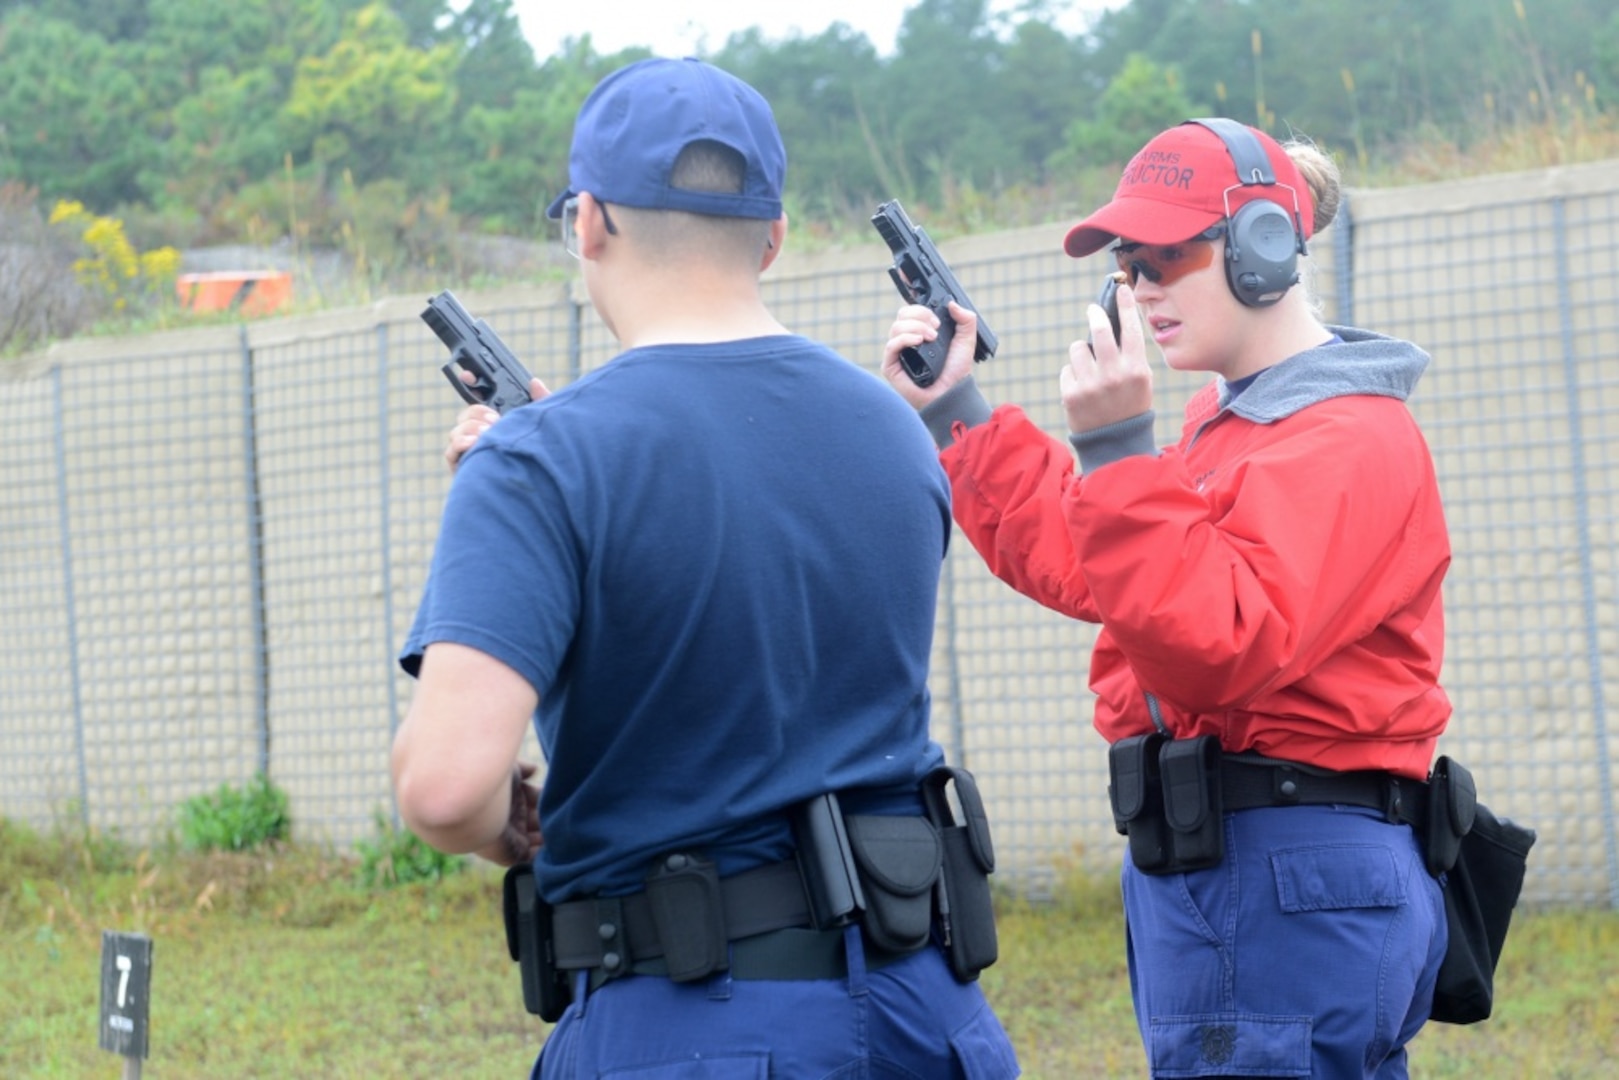 Coast Guard Petty Officer 2nd Class Cassandra Kintzley, a gunner’s mate at Coast Guard Sector Boston, works at the Fort Devens firing range, in Massachusetts, Wednesday, September, 20, 2017, to qualify Coast Guard members in weapons handling. Kintzley, a highly skilled shooter, trains Coast Guard men and women who enforce maritime laws, and protect Northeast ports and waterways. U.S. Coast Guard photo by Petty Officer 2nd Class Cynthia Oldham.